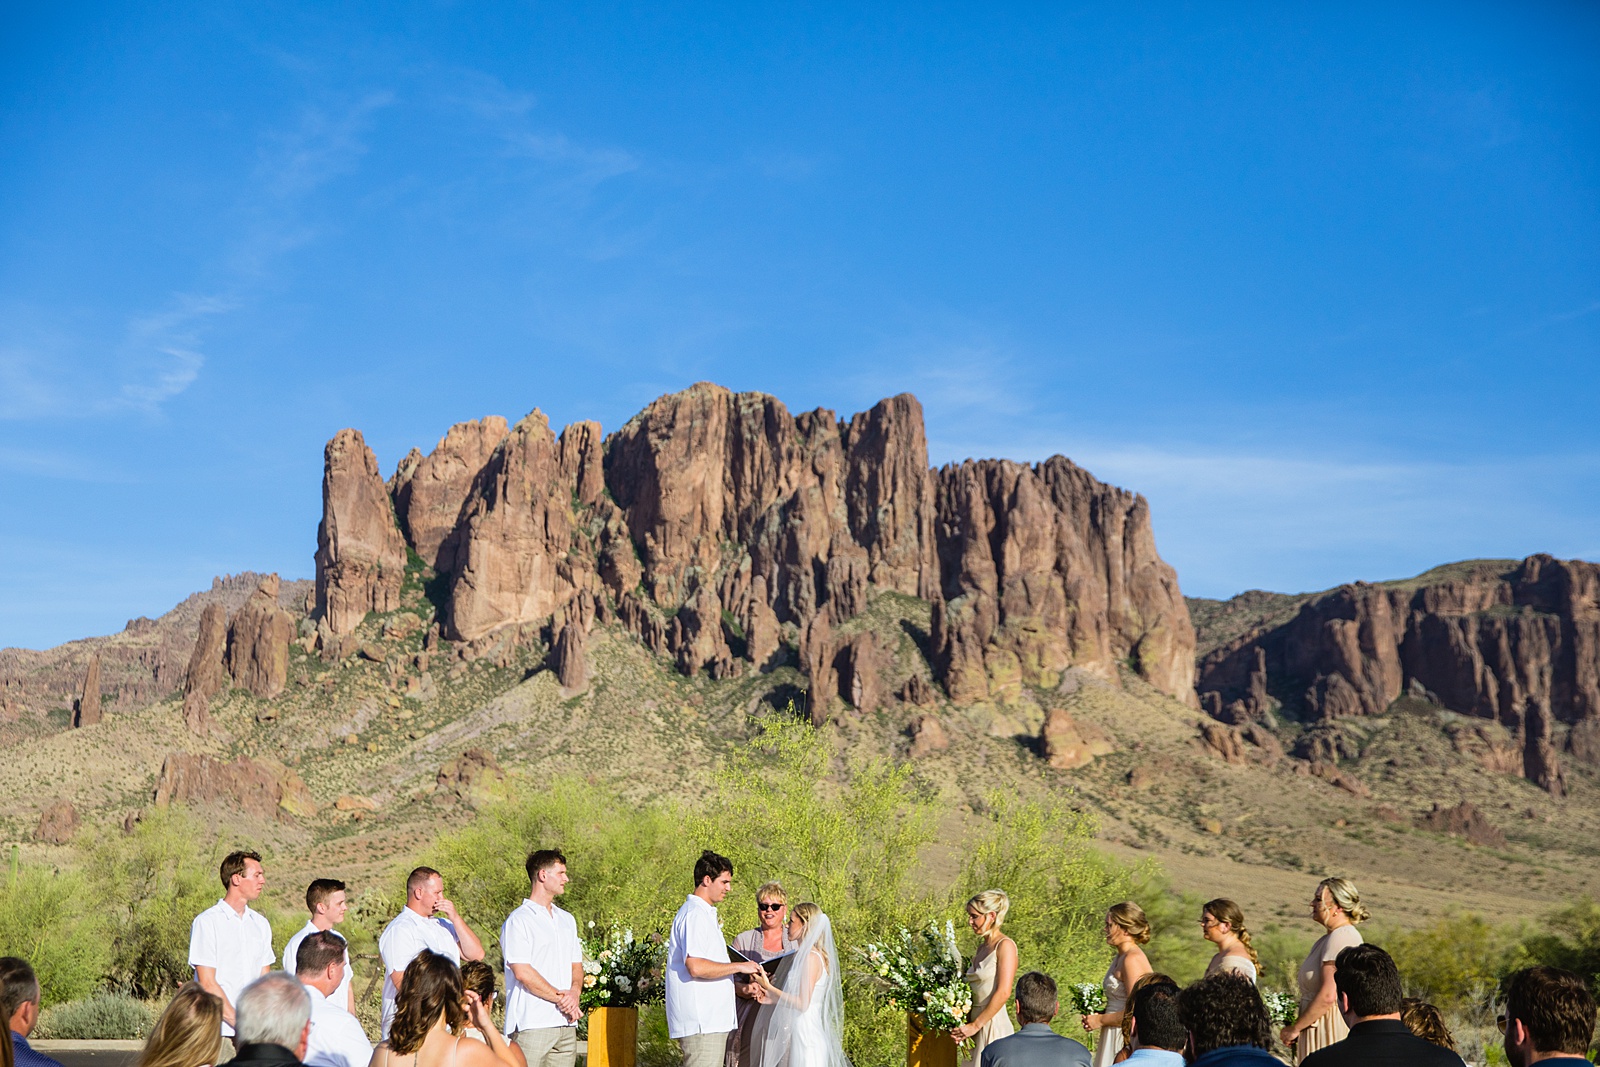 Wedding ceremony at Superstition Mountain Micro by Phoenix wedding photographer PMA Photography.